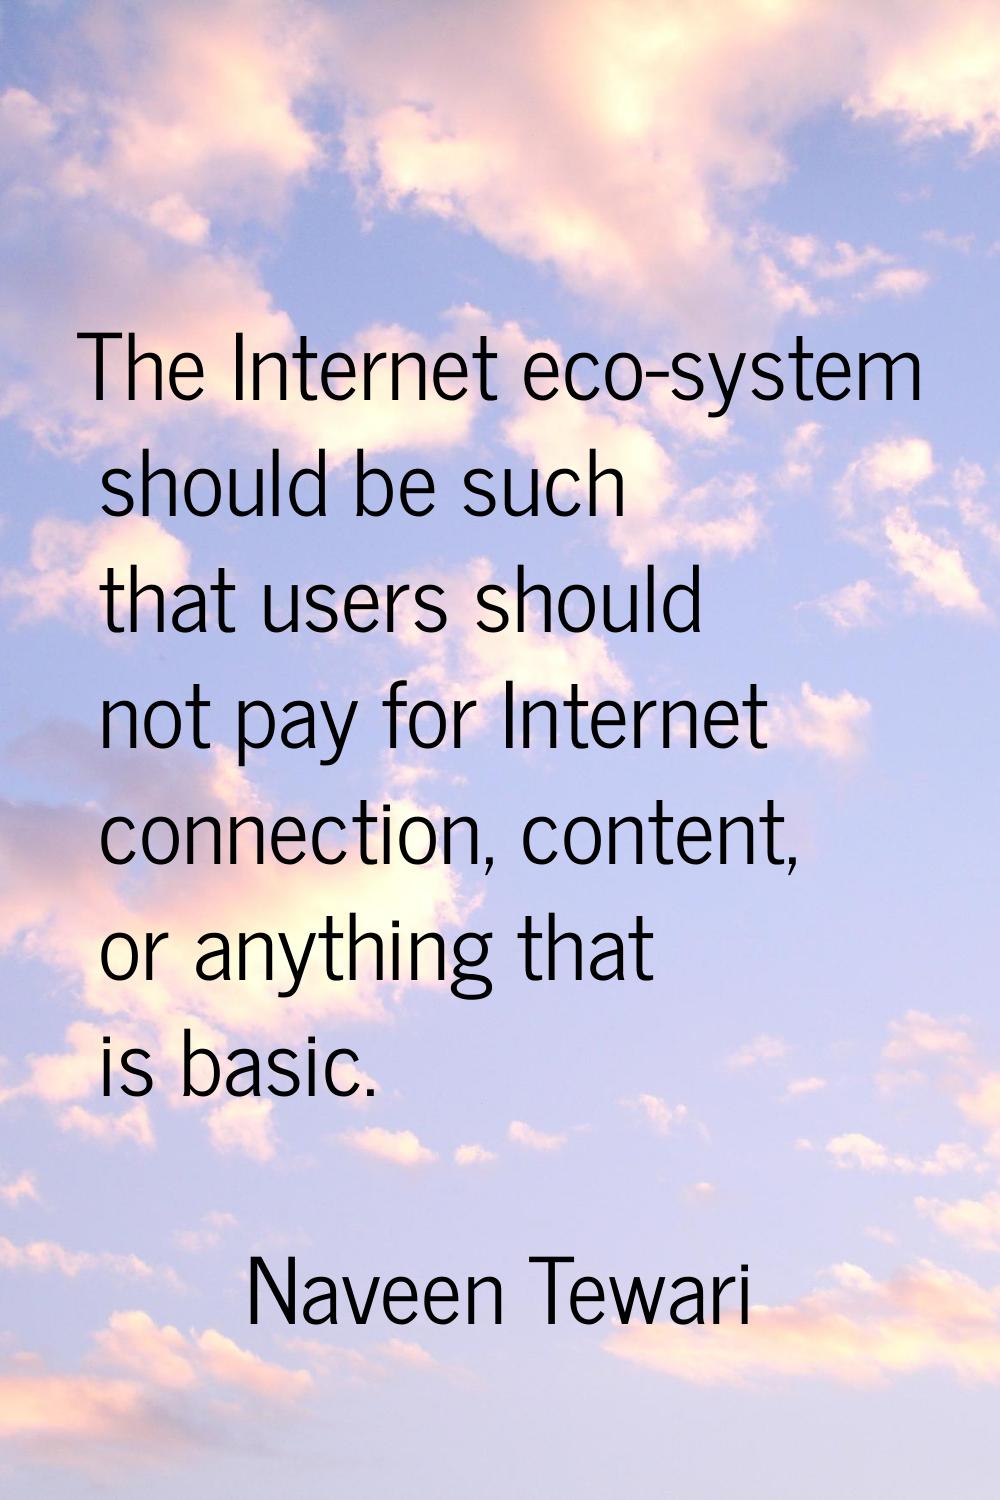 The Internet eco-system should be such that users should not pay for Internet connection, content, 